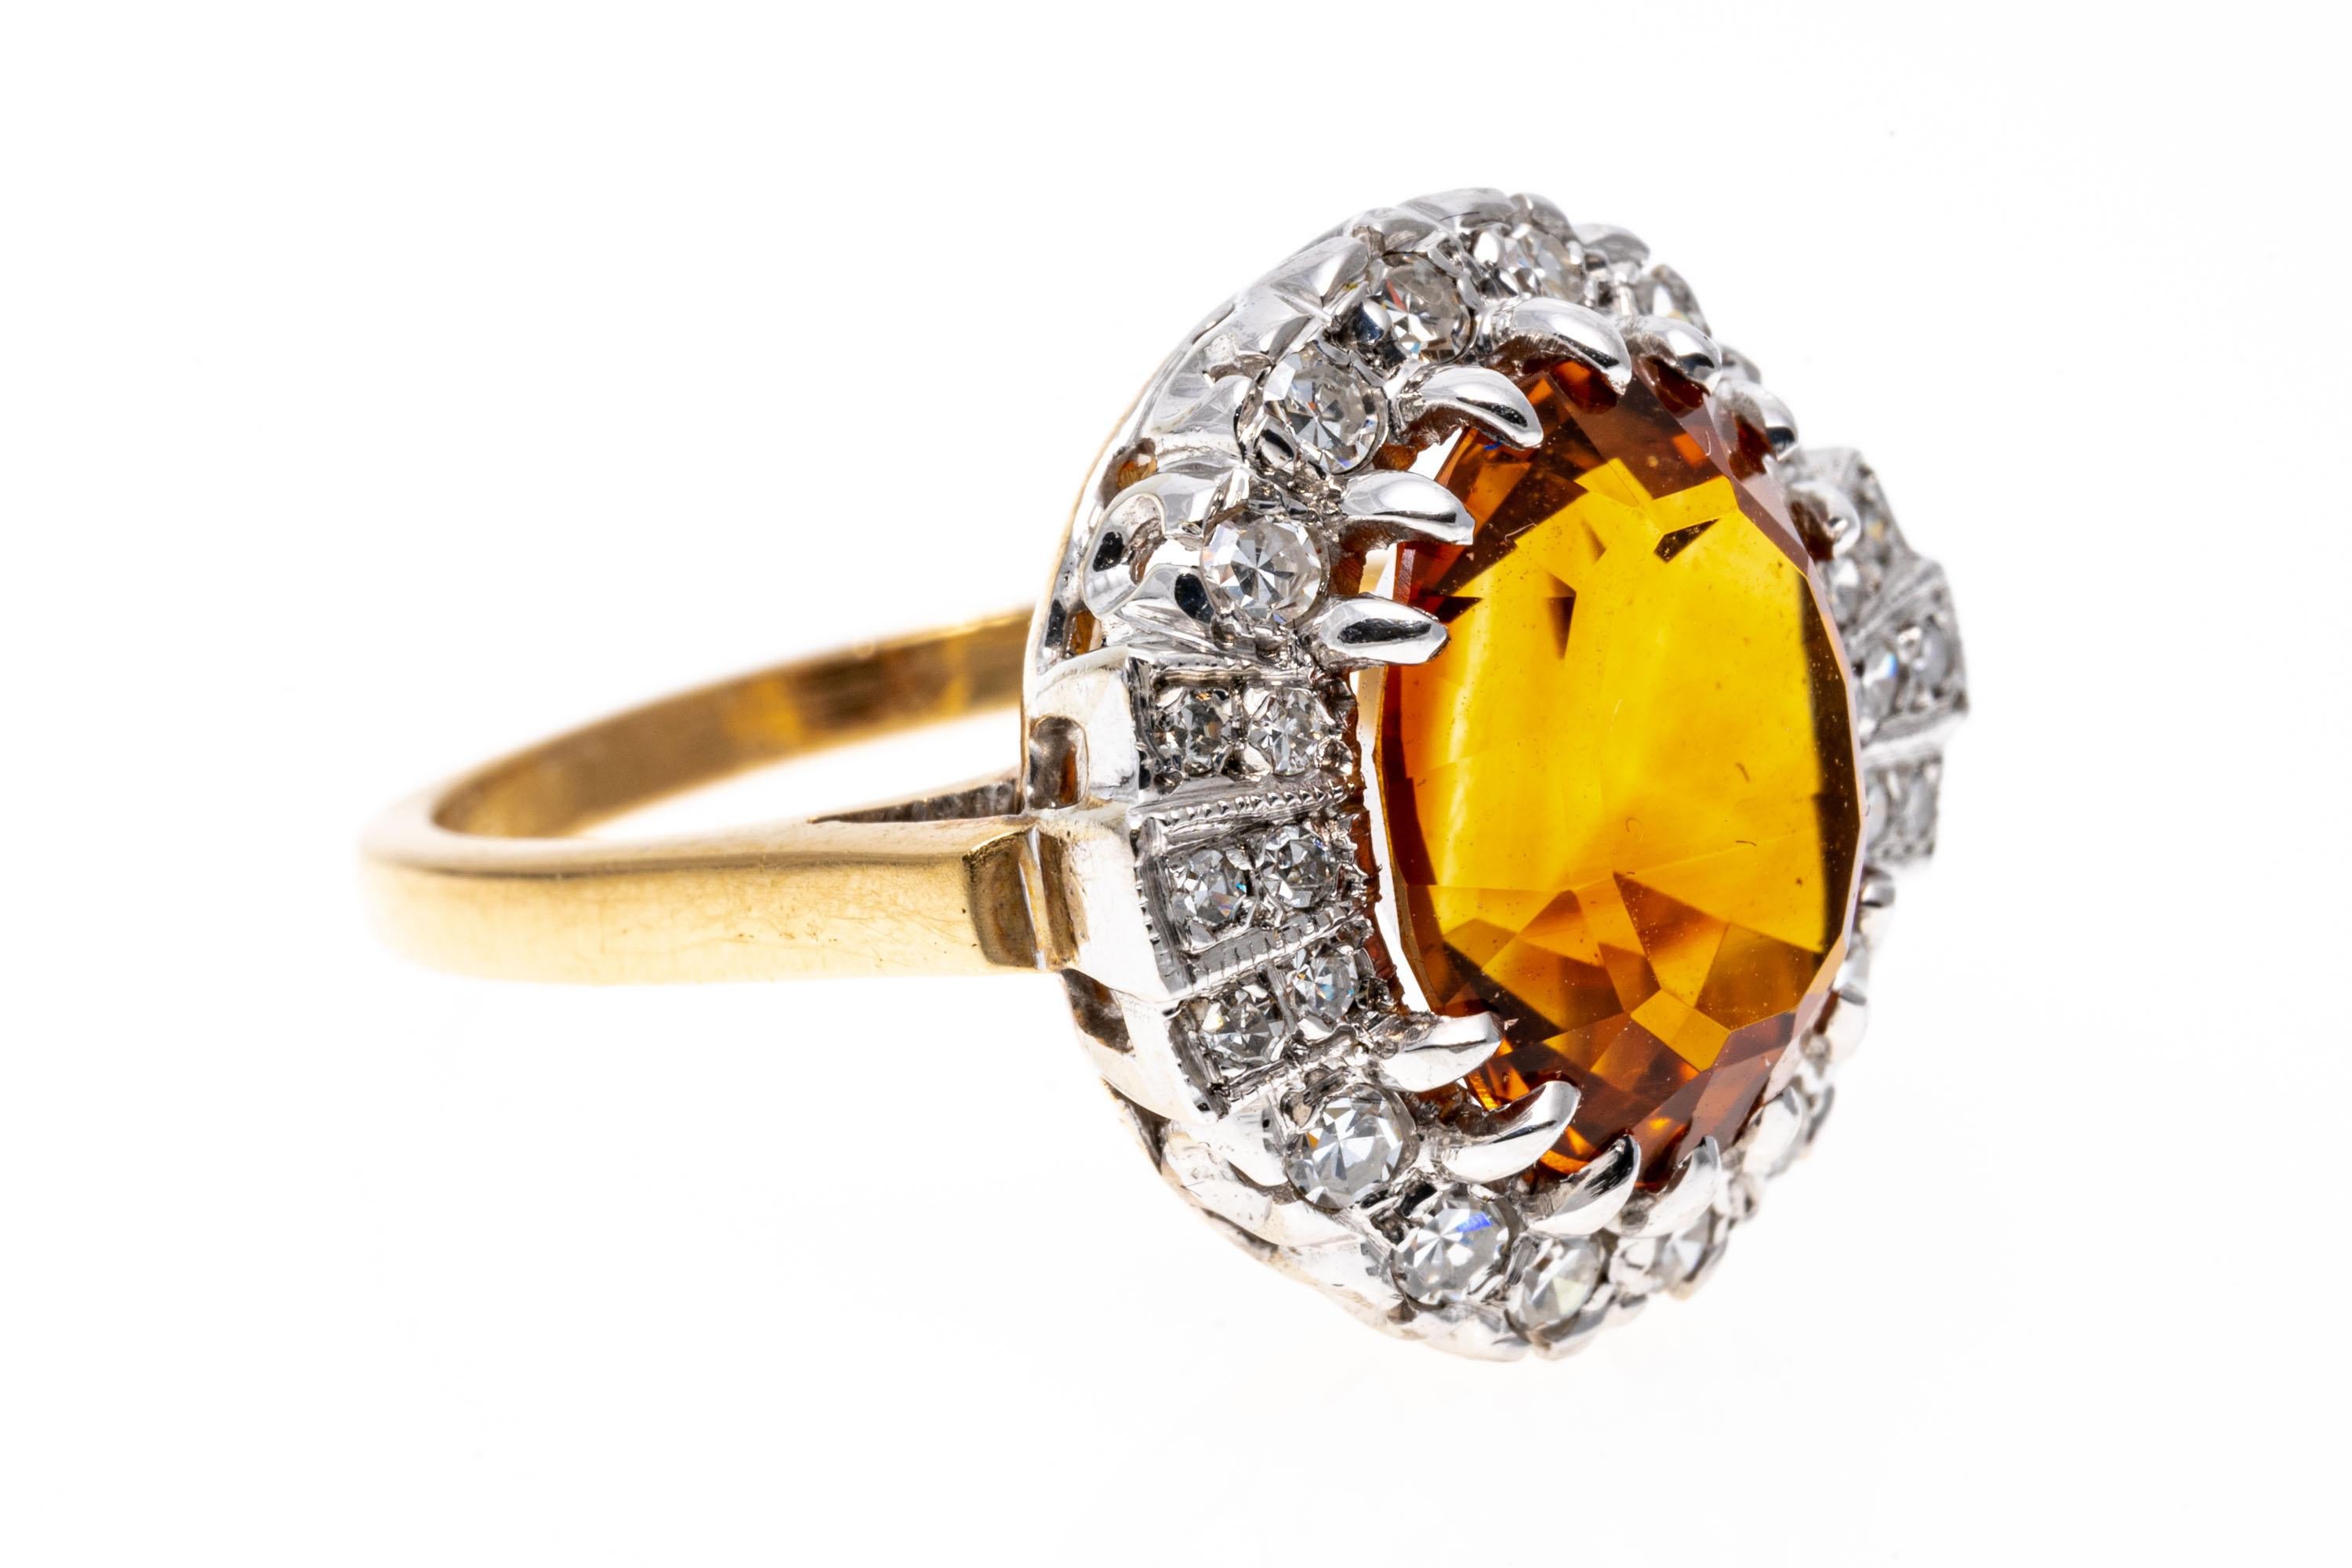 14k yellow gold ring. This lovely ring features a center oval faceted, medium to dark orange color citrine, approximately 3.95 CTS, accented by a half halo set with round faceted diamonds, and flanked with fan sides, also set with round faceted